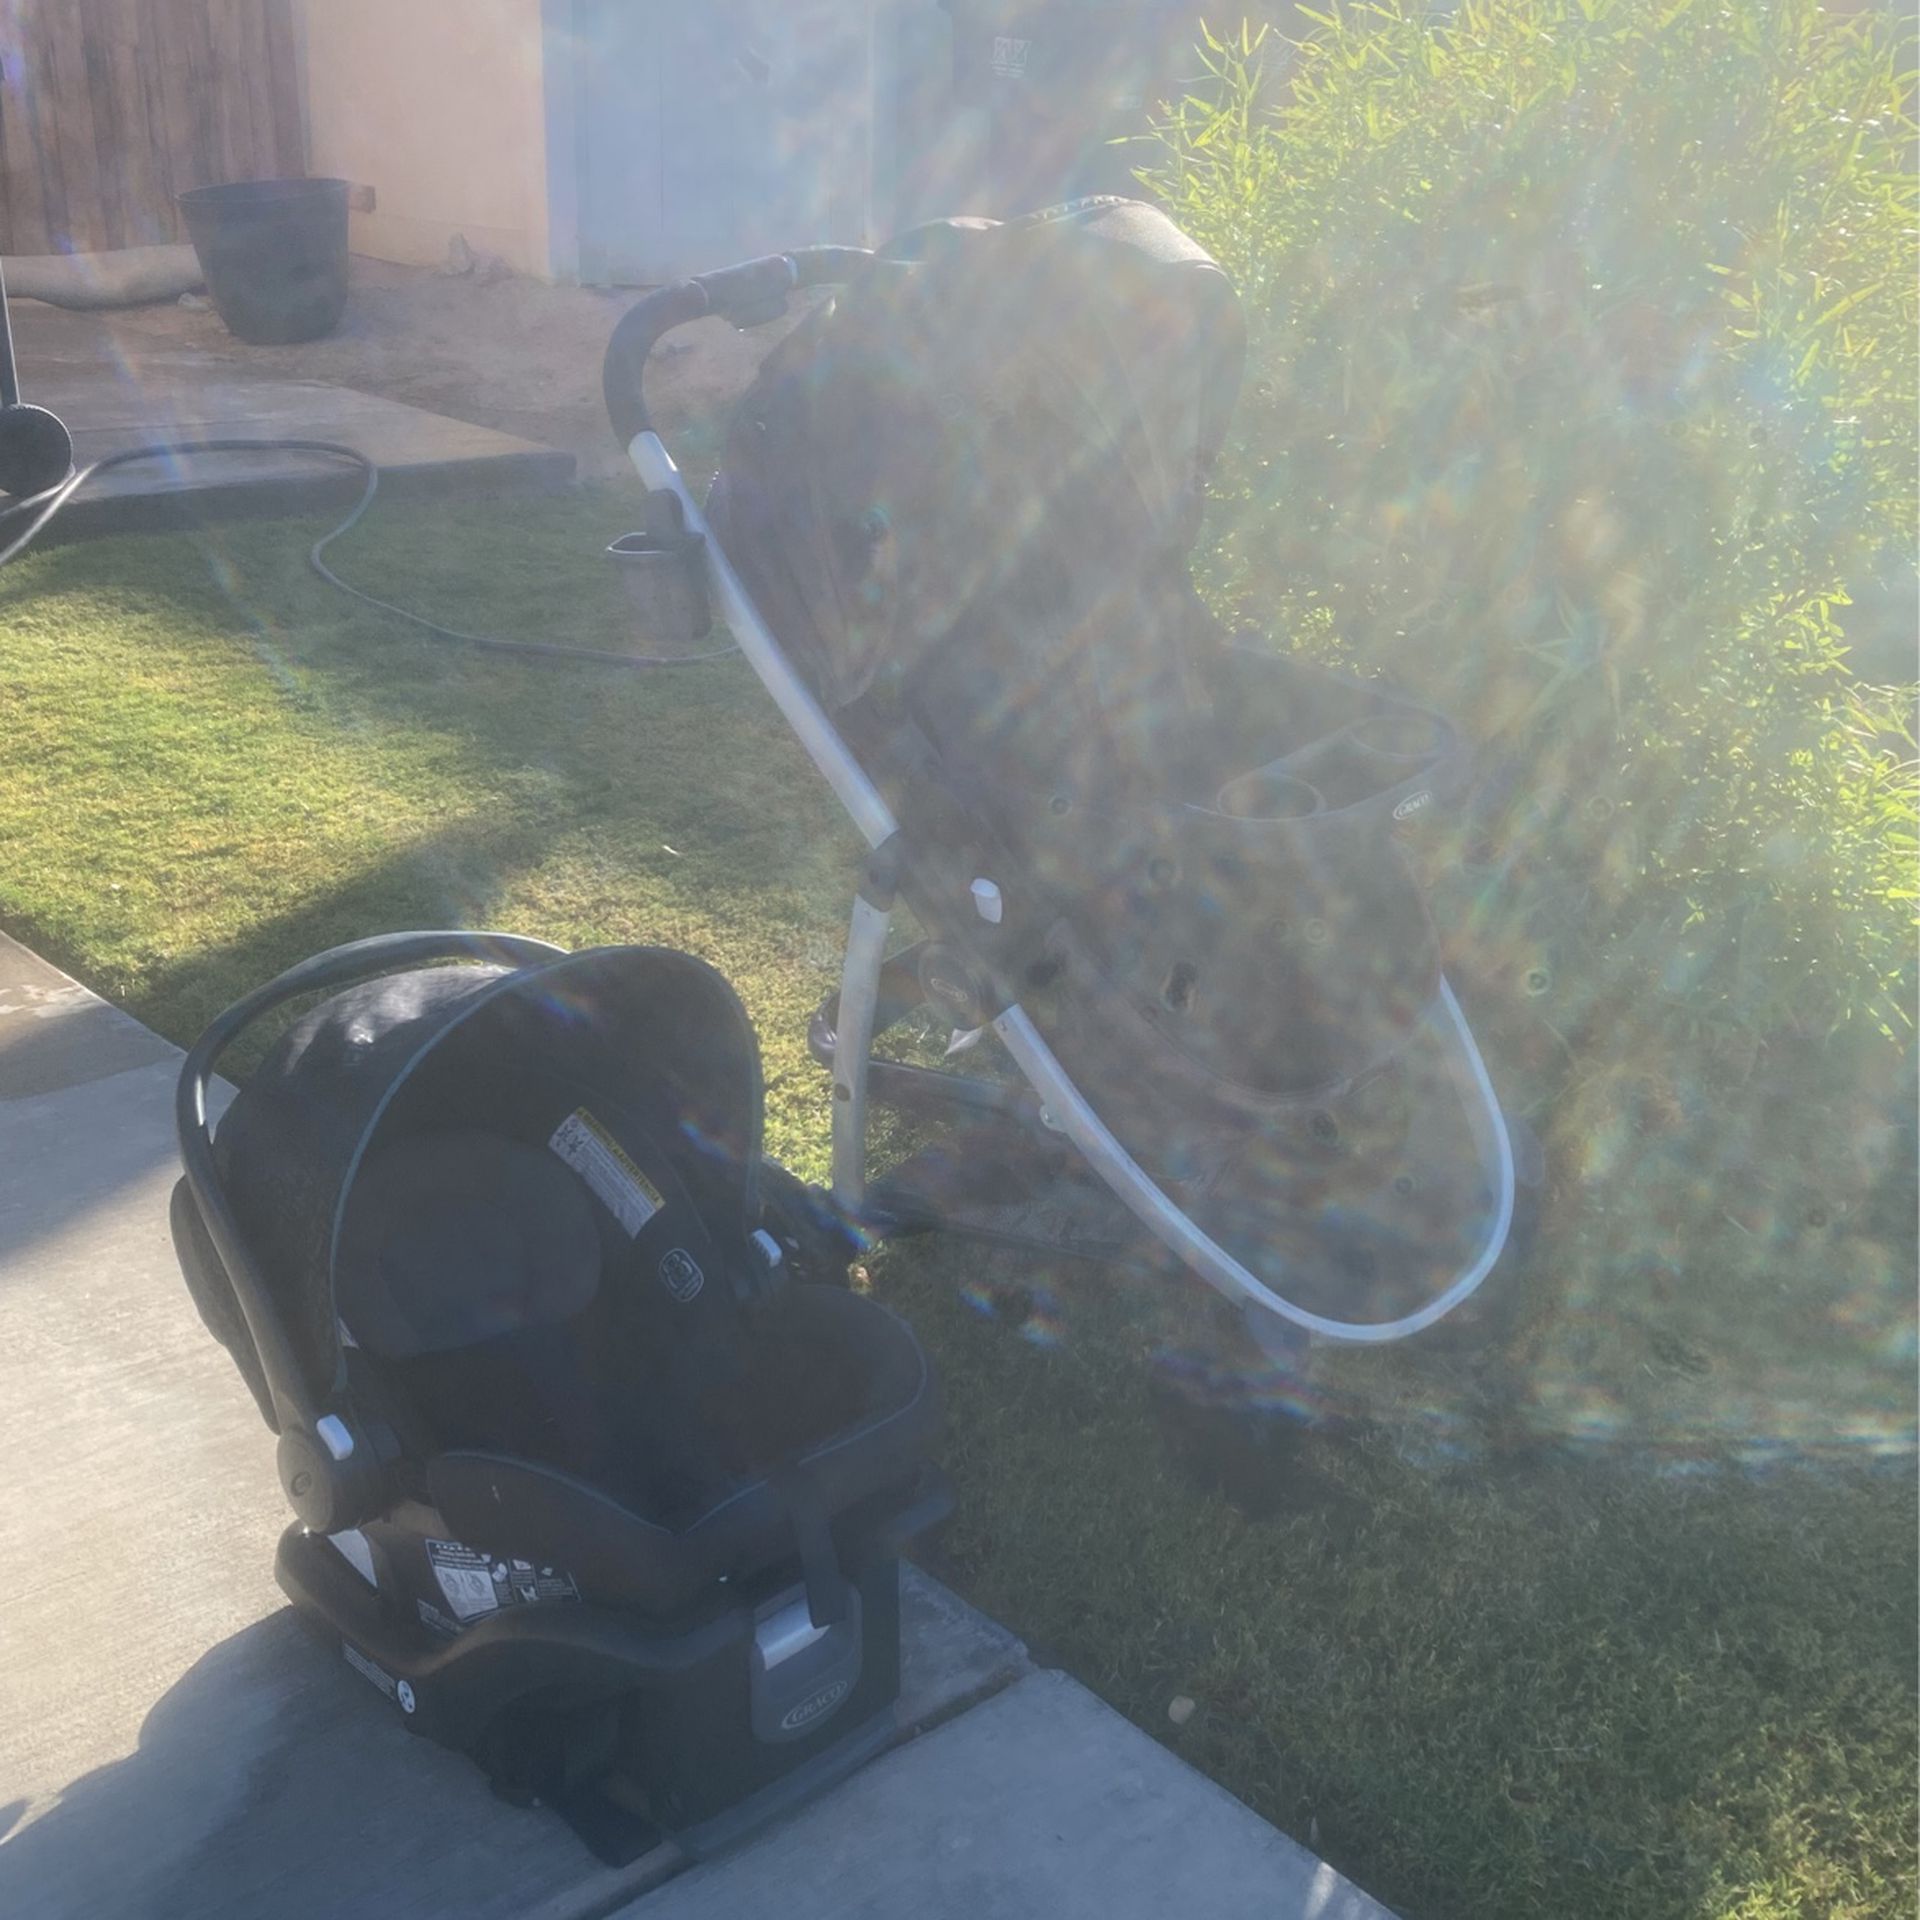 Used, Worn-Out Car Seat And Stroller Set. First Come First Serve.